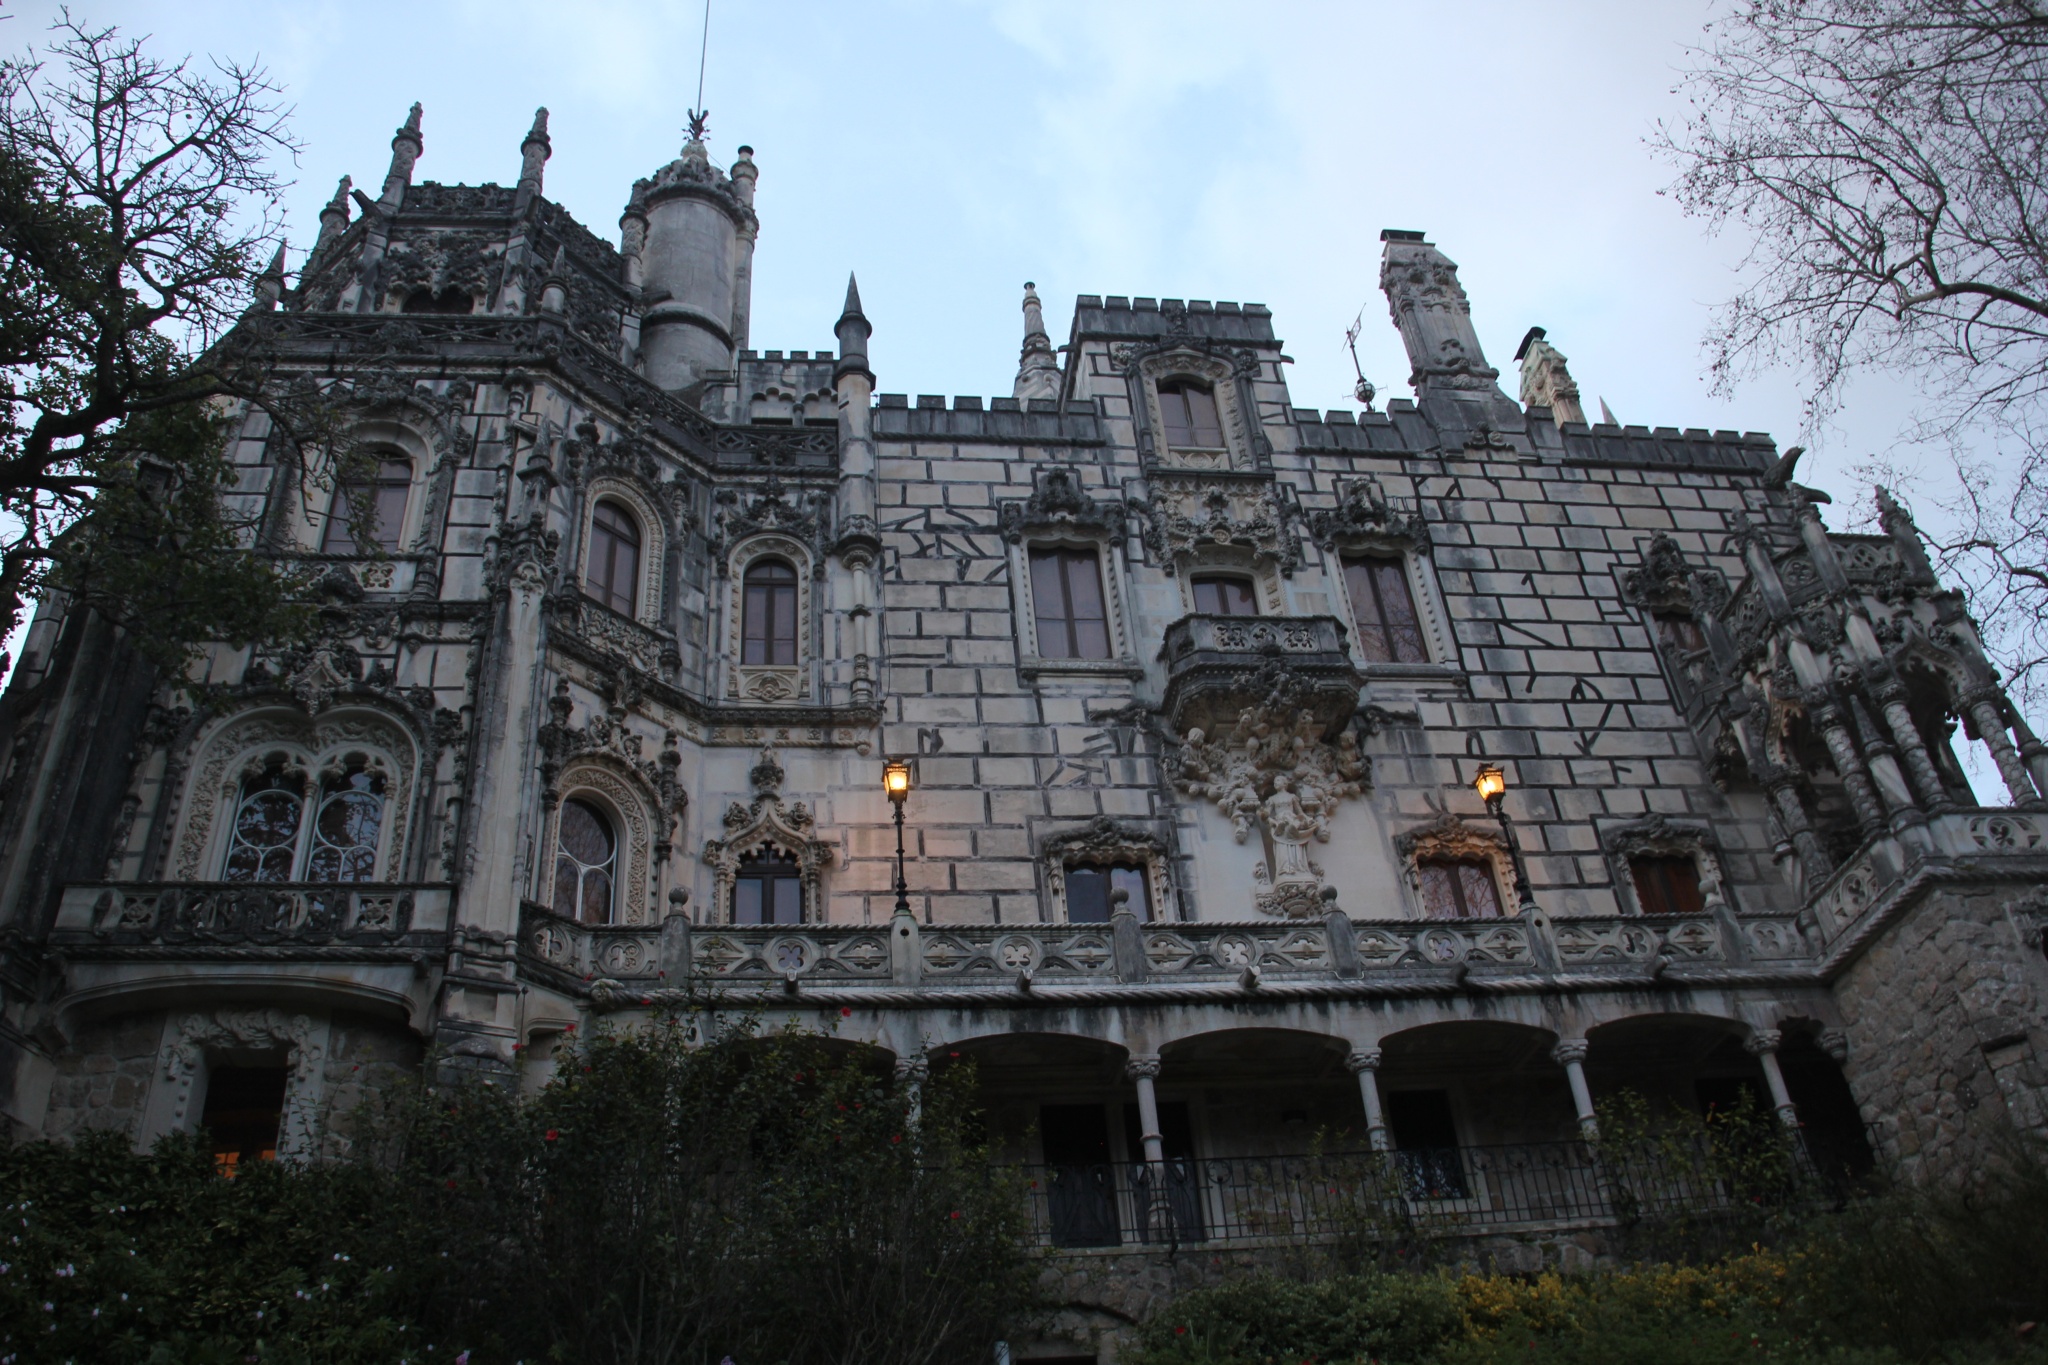 The palace at the Quinta da Regaleira estate is imposing.